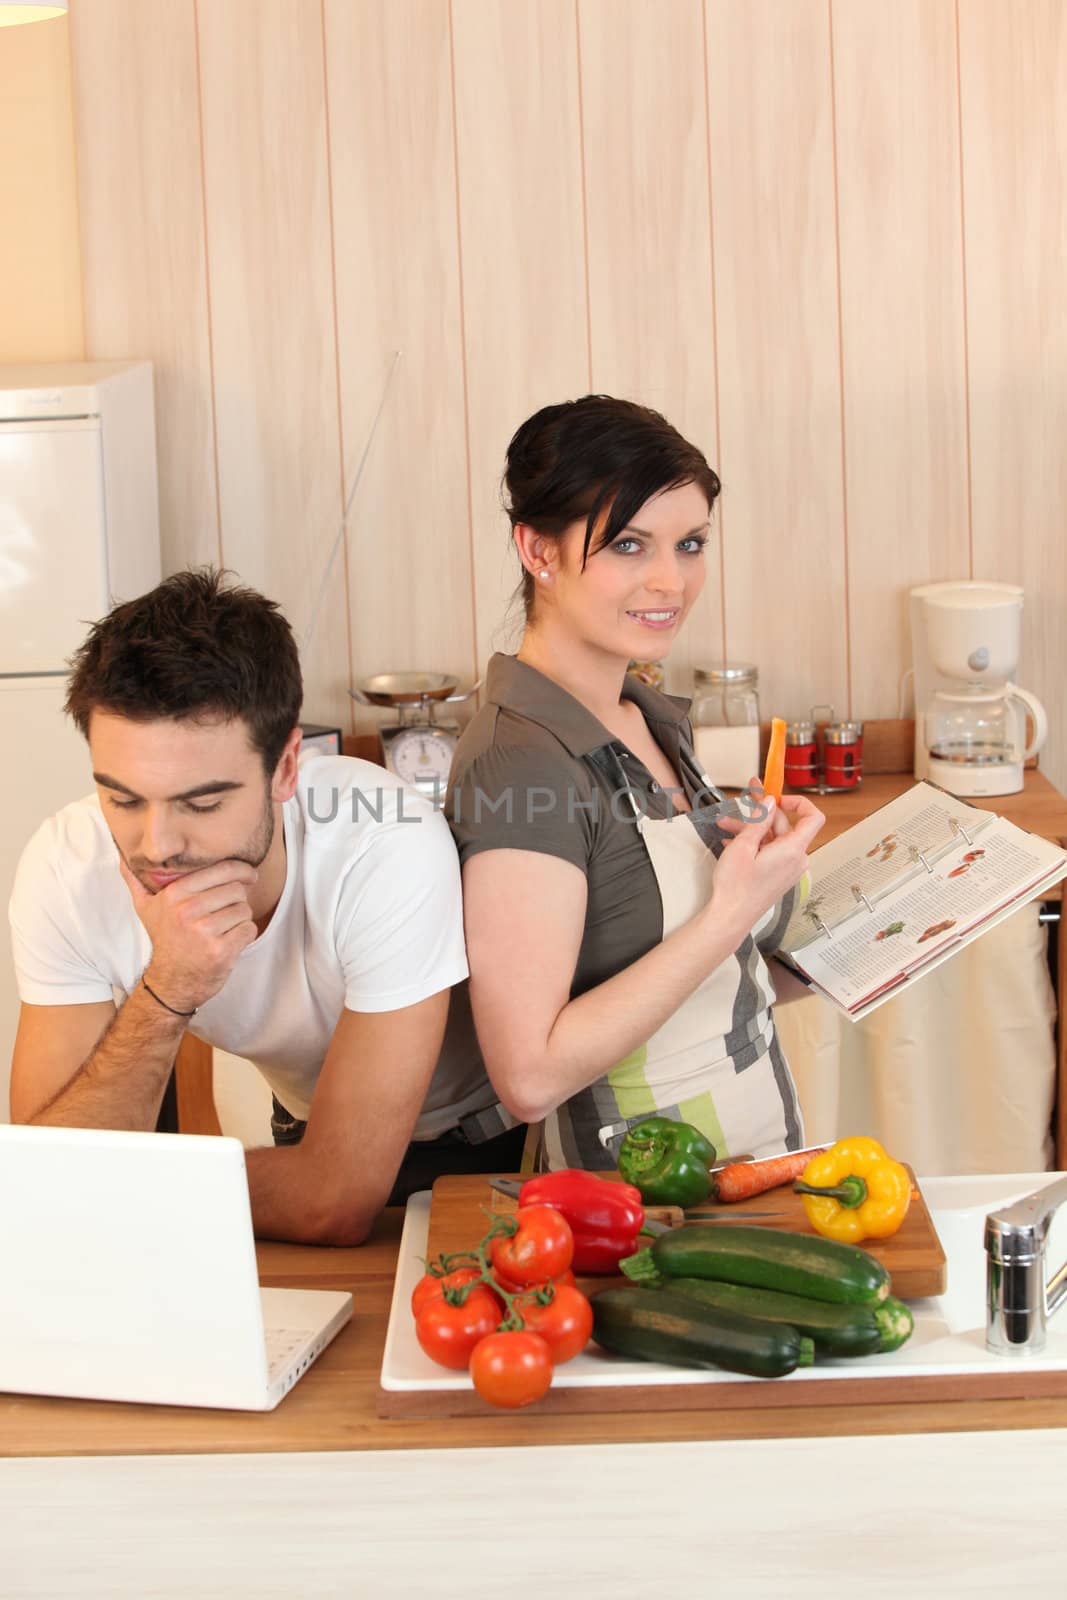 Couple looking at recipes